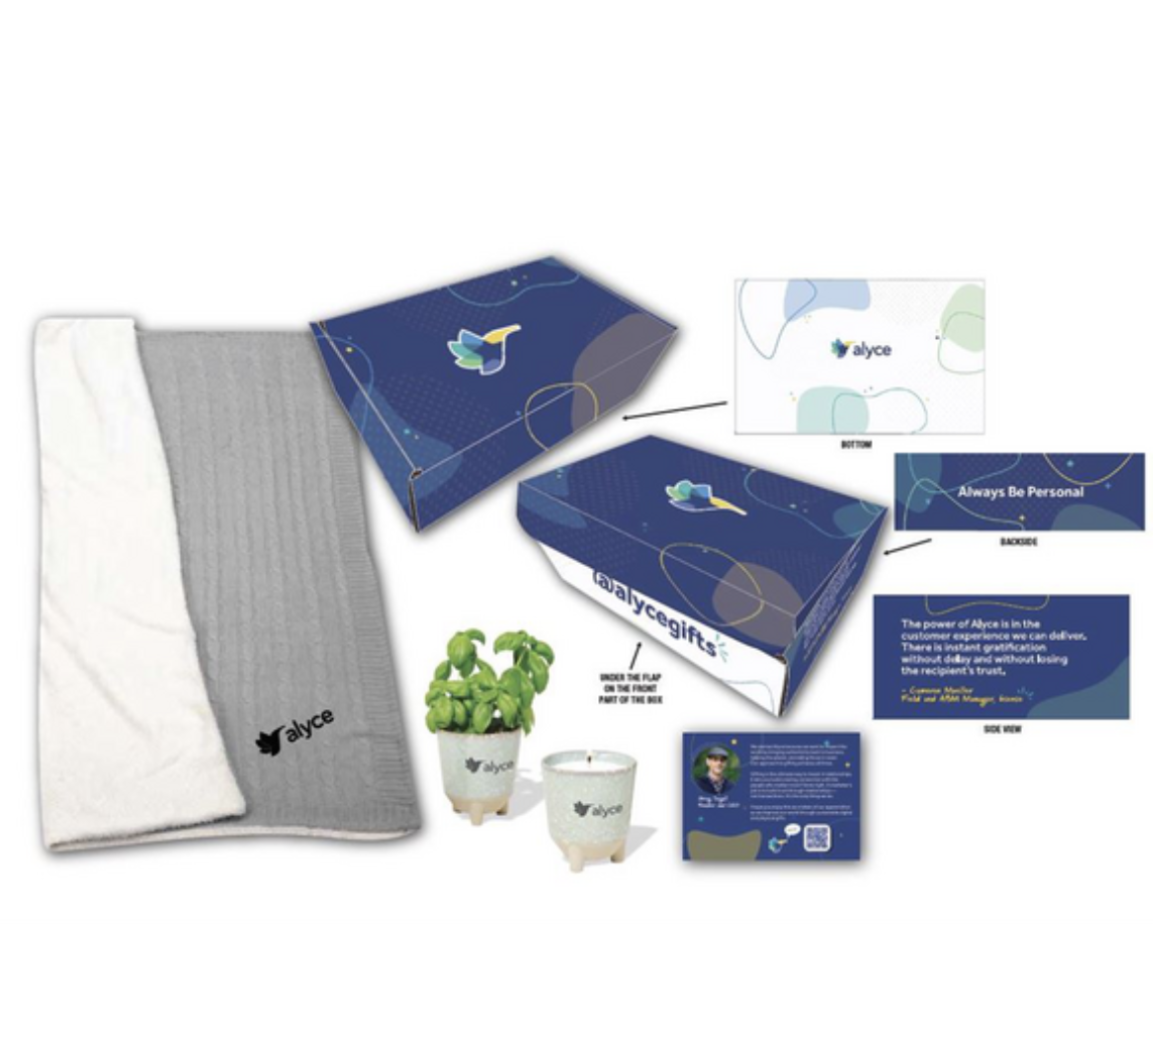 Branded Swag Boxes To Fit Events & Marketing Campaigns